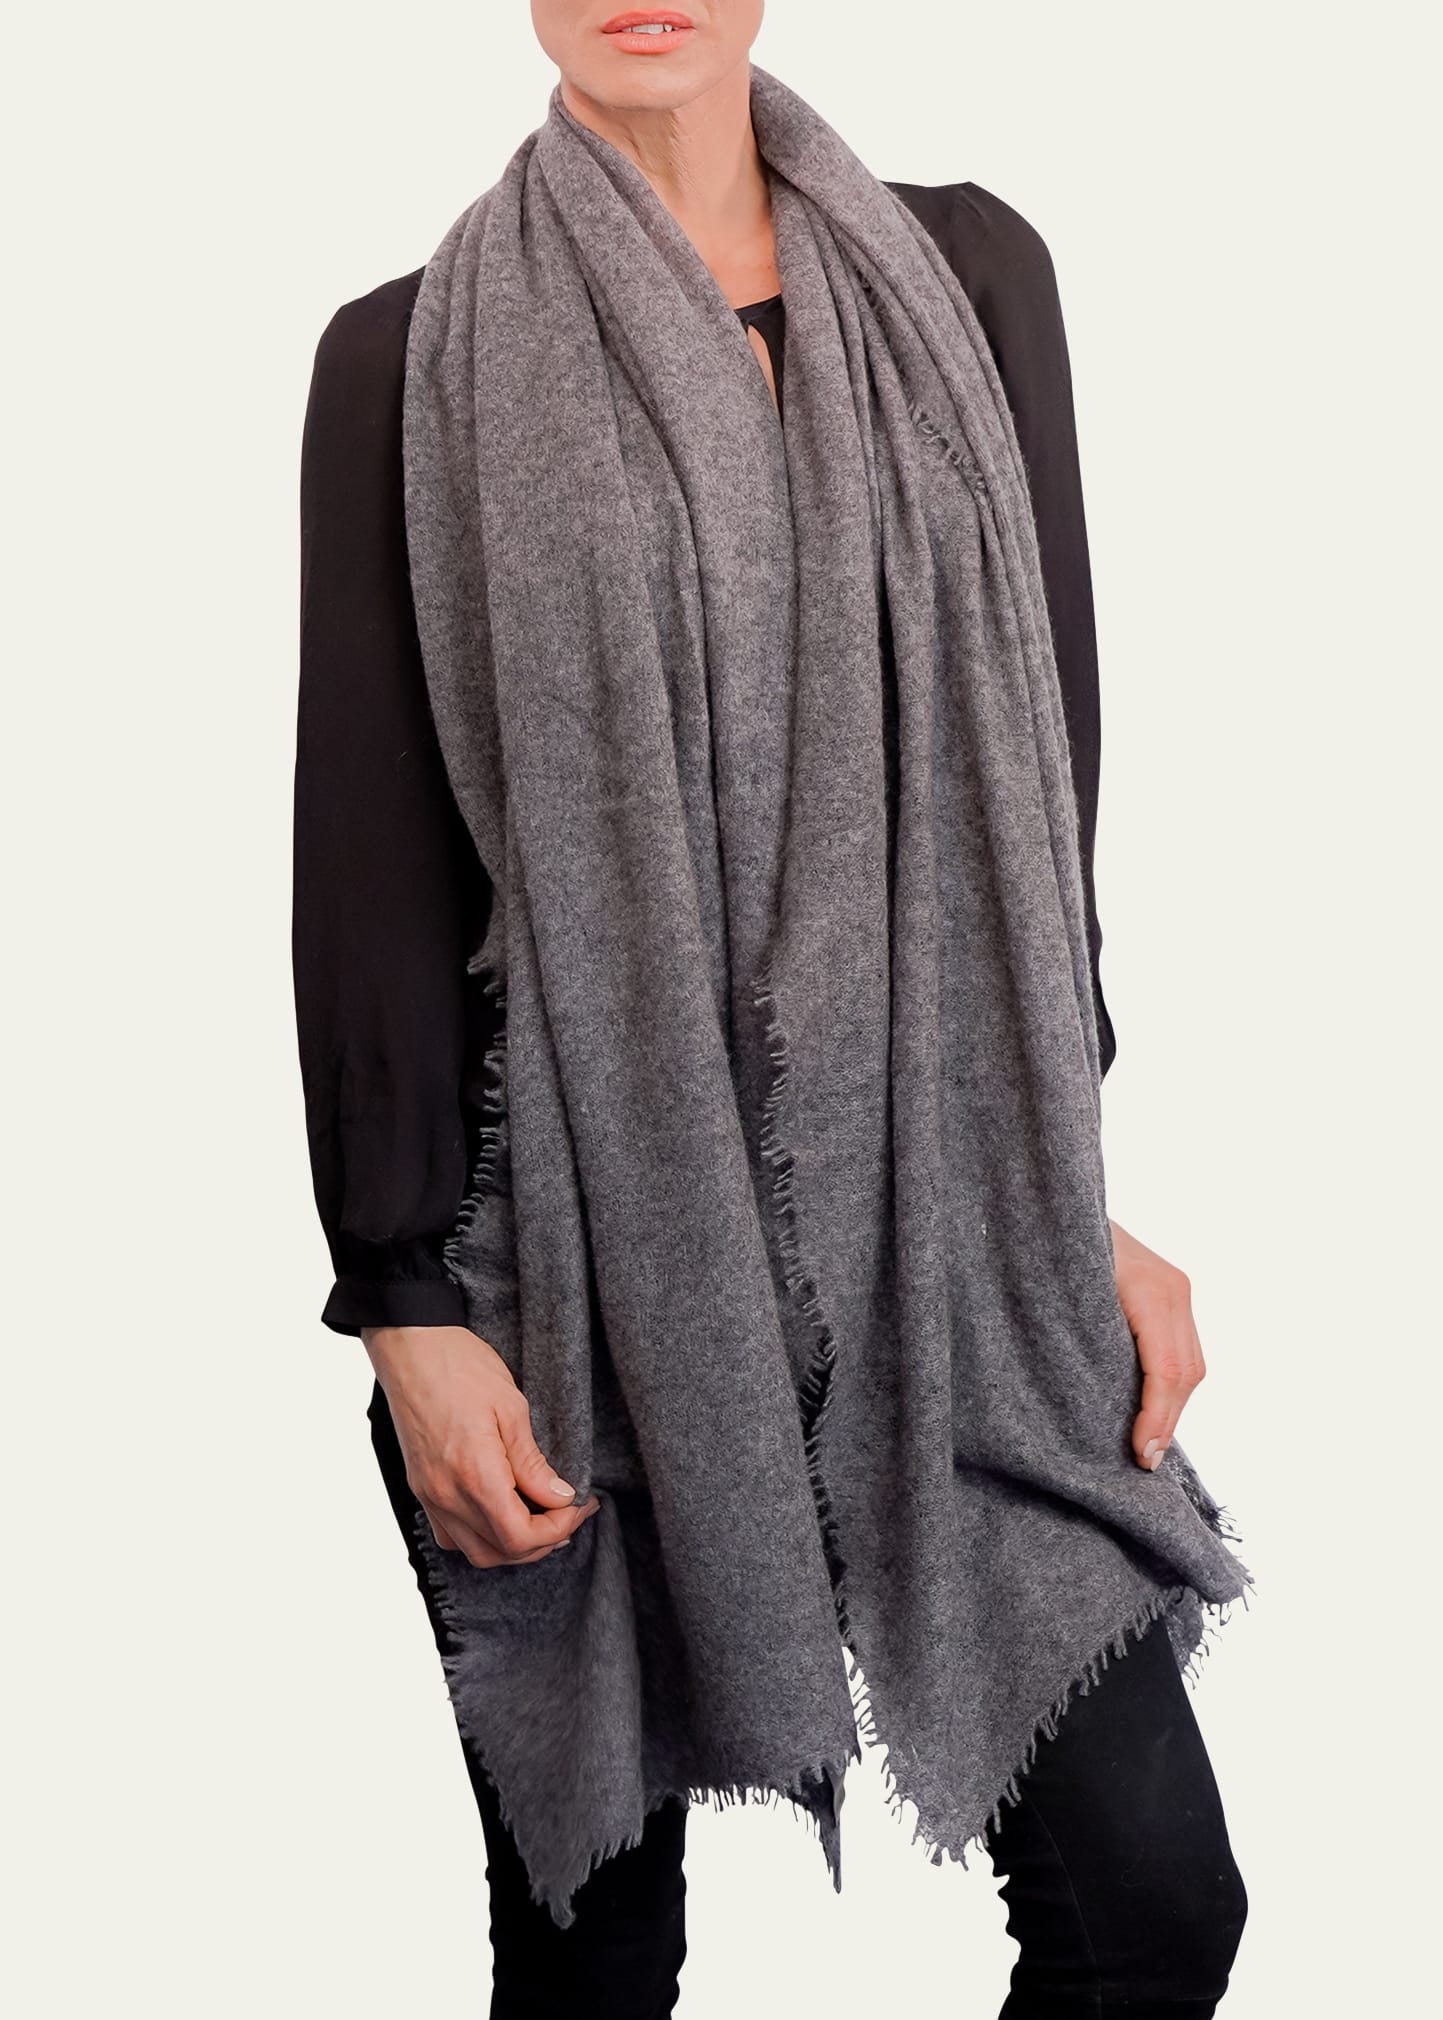 Ian Saude Sophie Cashmere Wrap In Gray